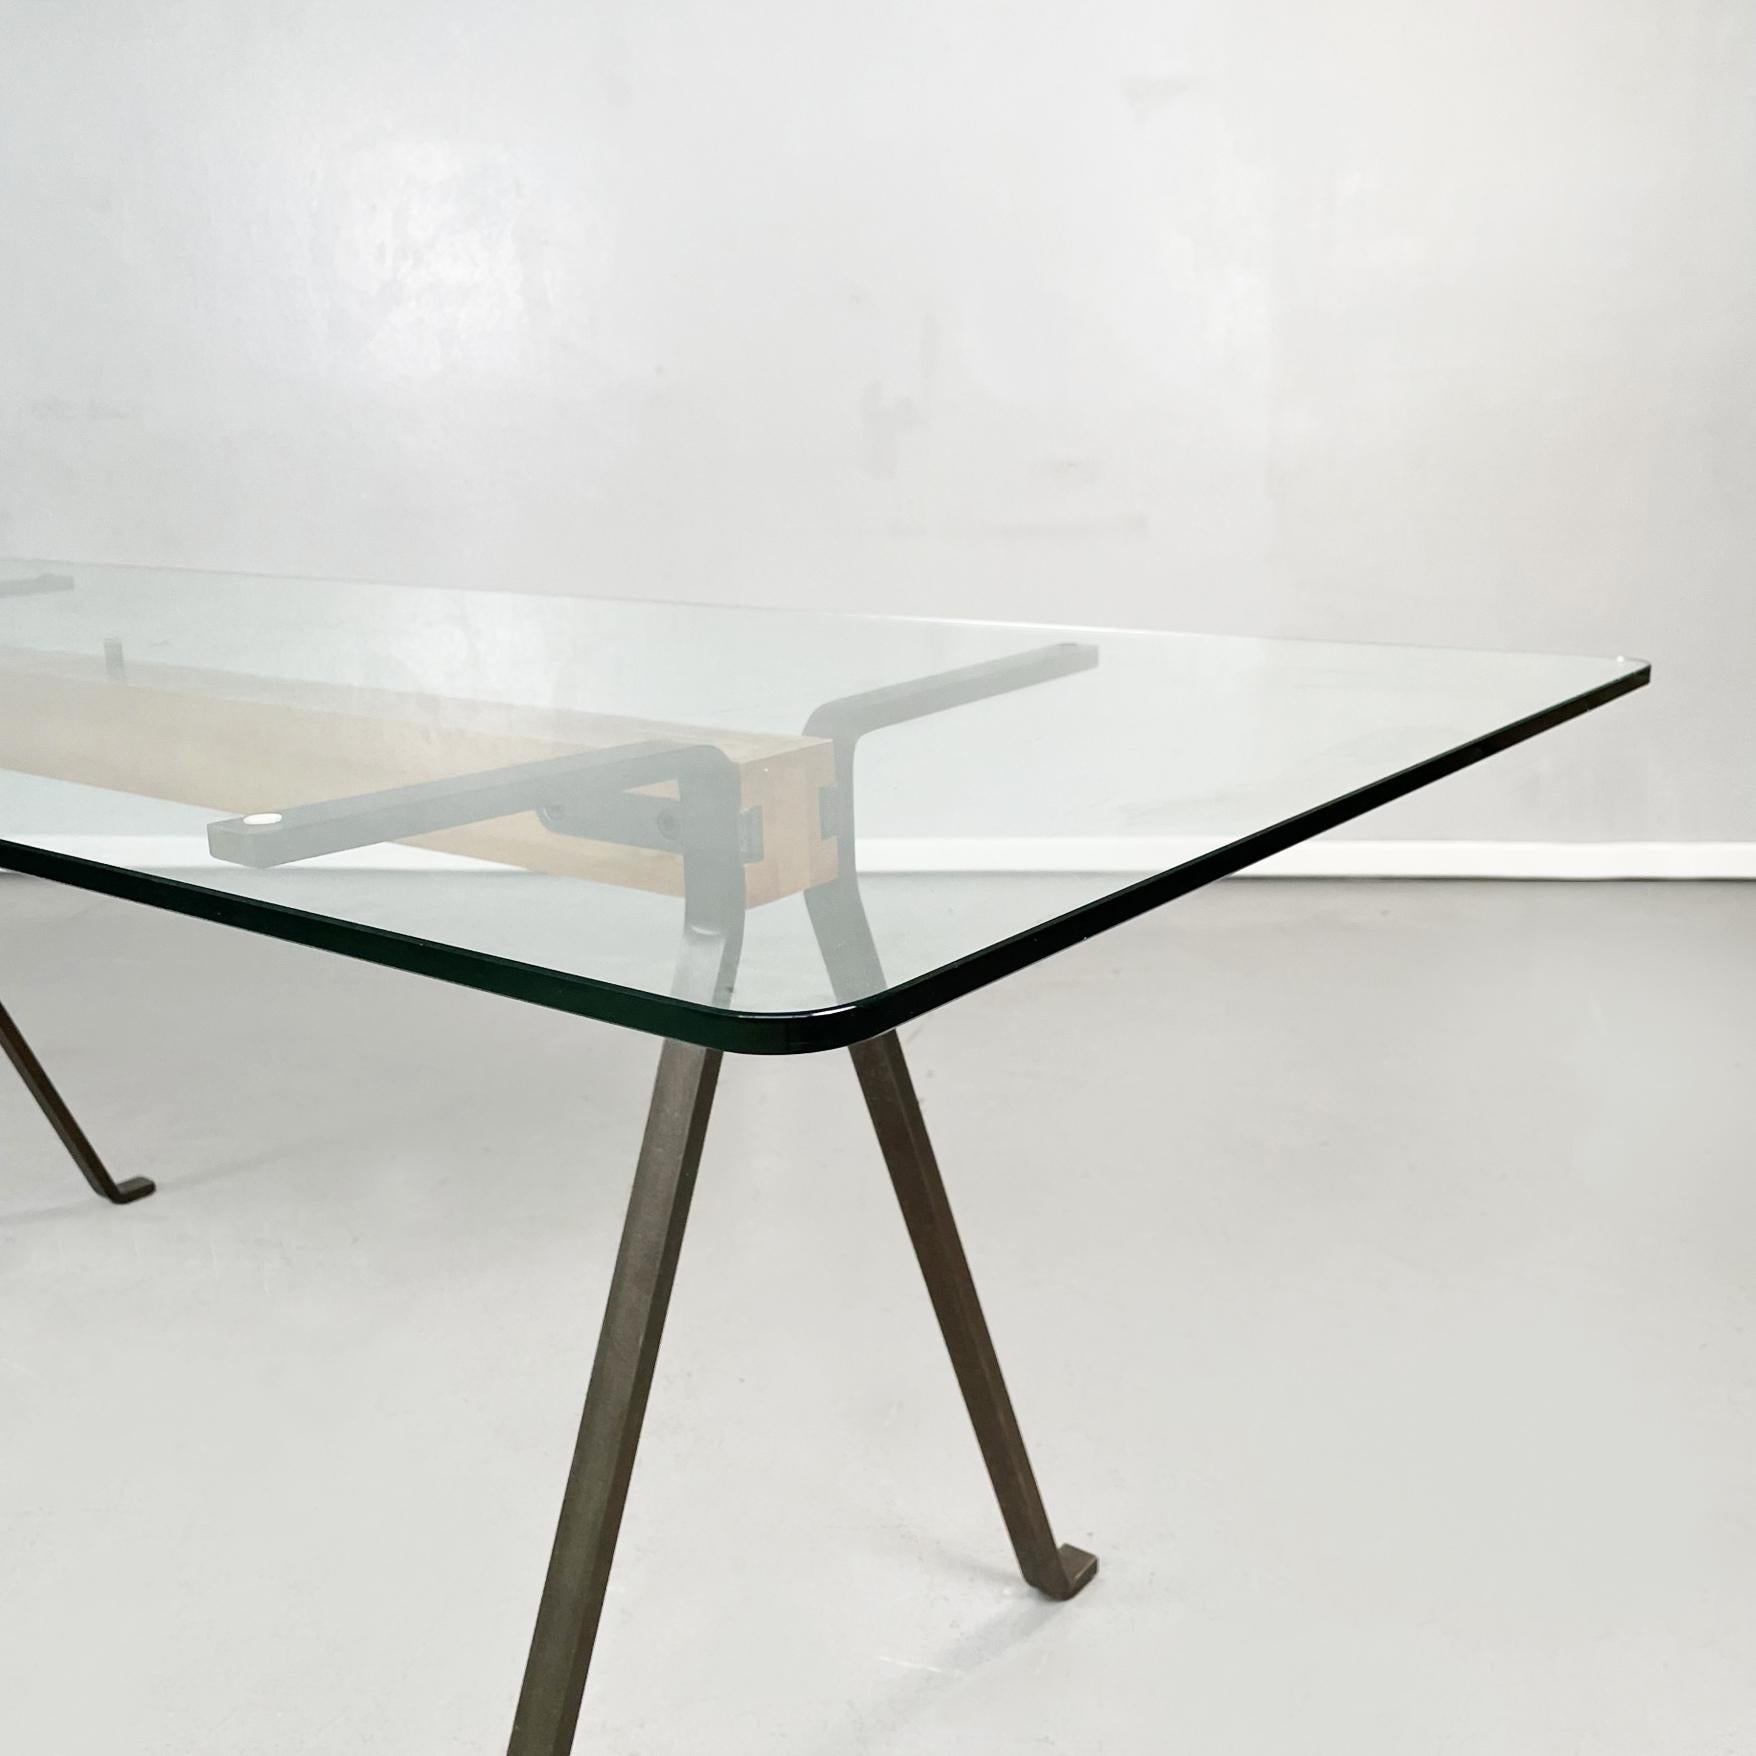 Italian Modern Glass Wood Steel Dining Table Frate by Enzo Mari for Driade, 1973 In Good Condition For Sale In MIlano, IT